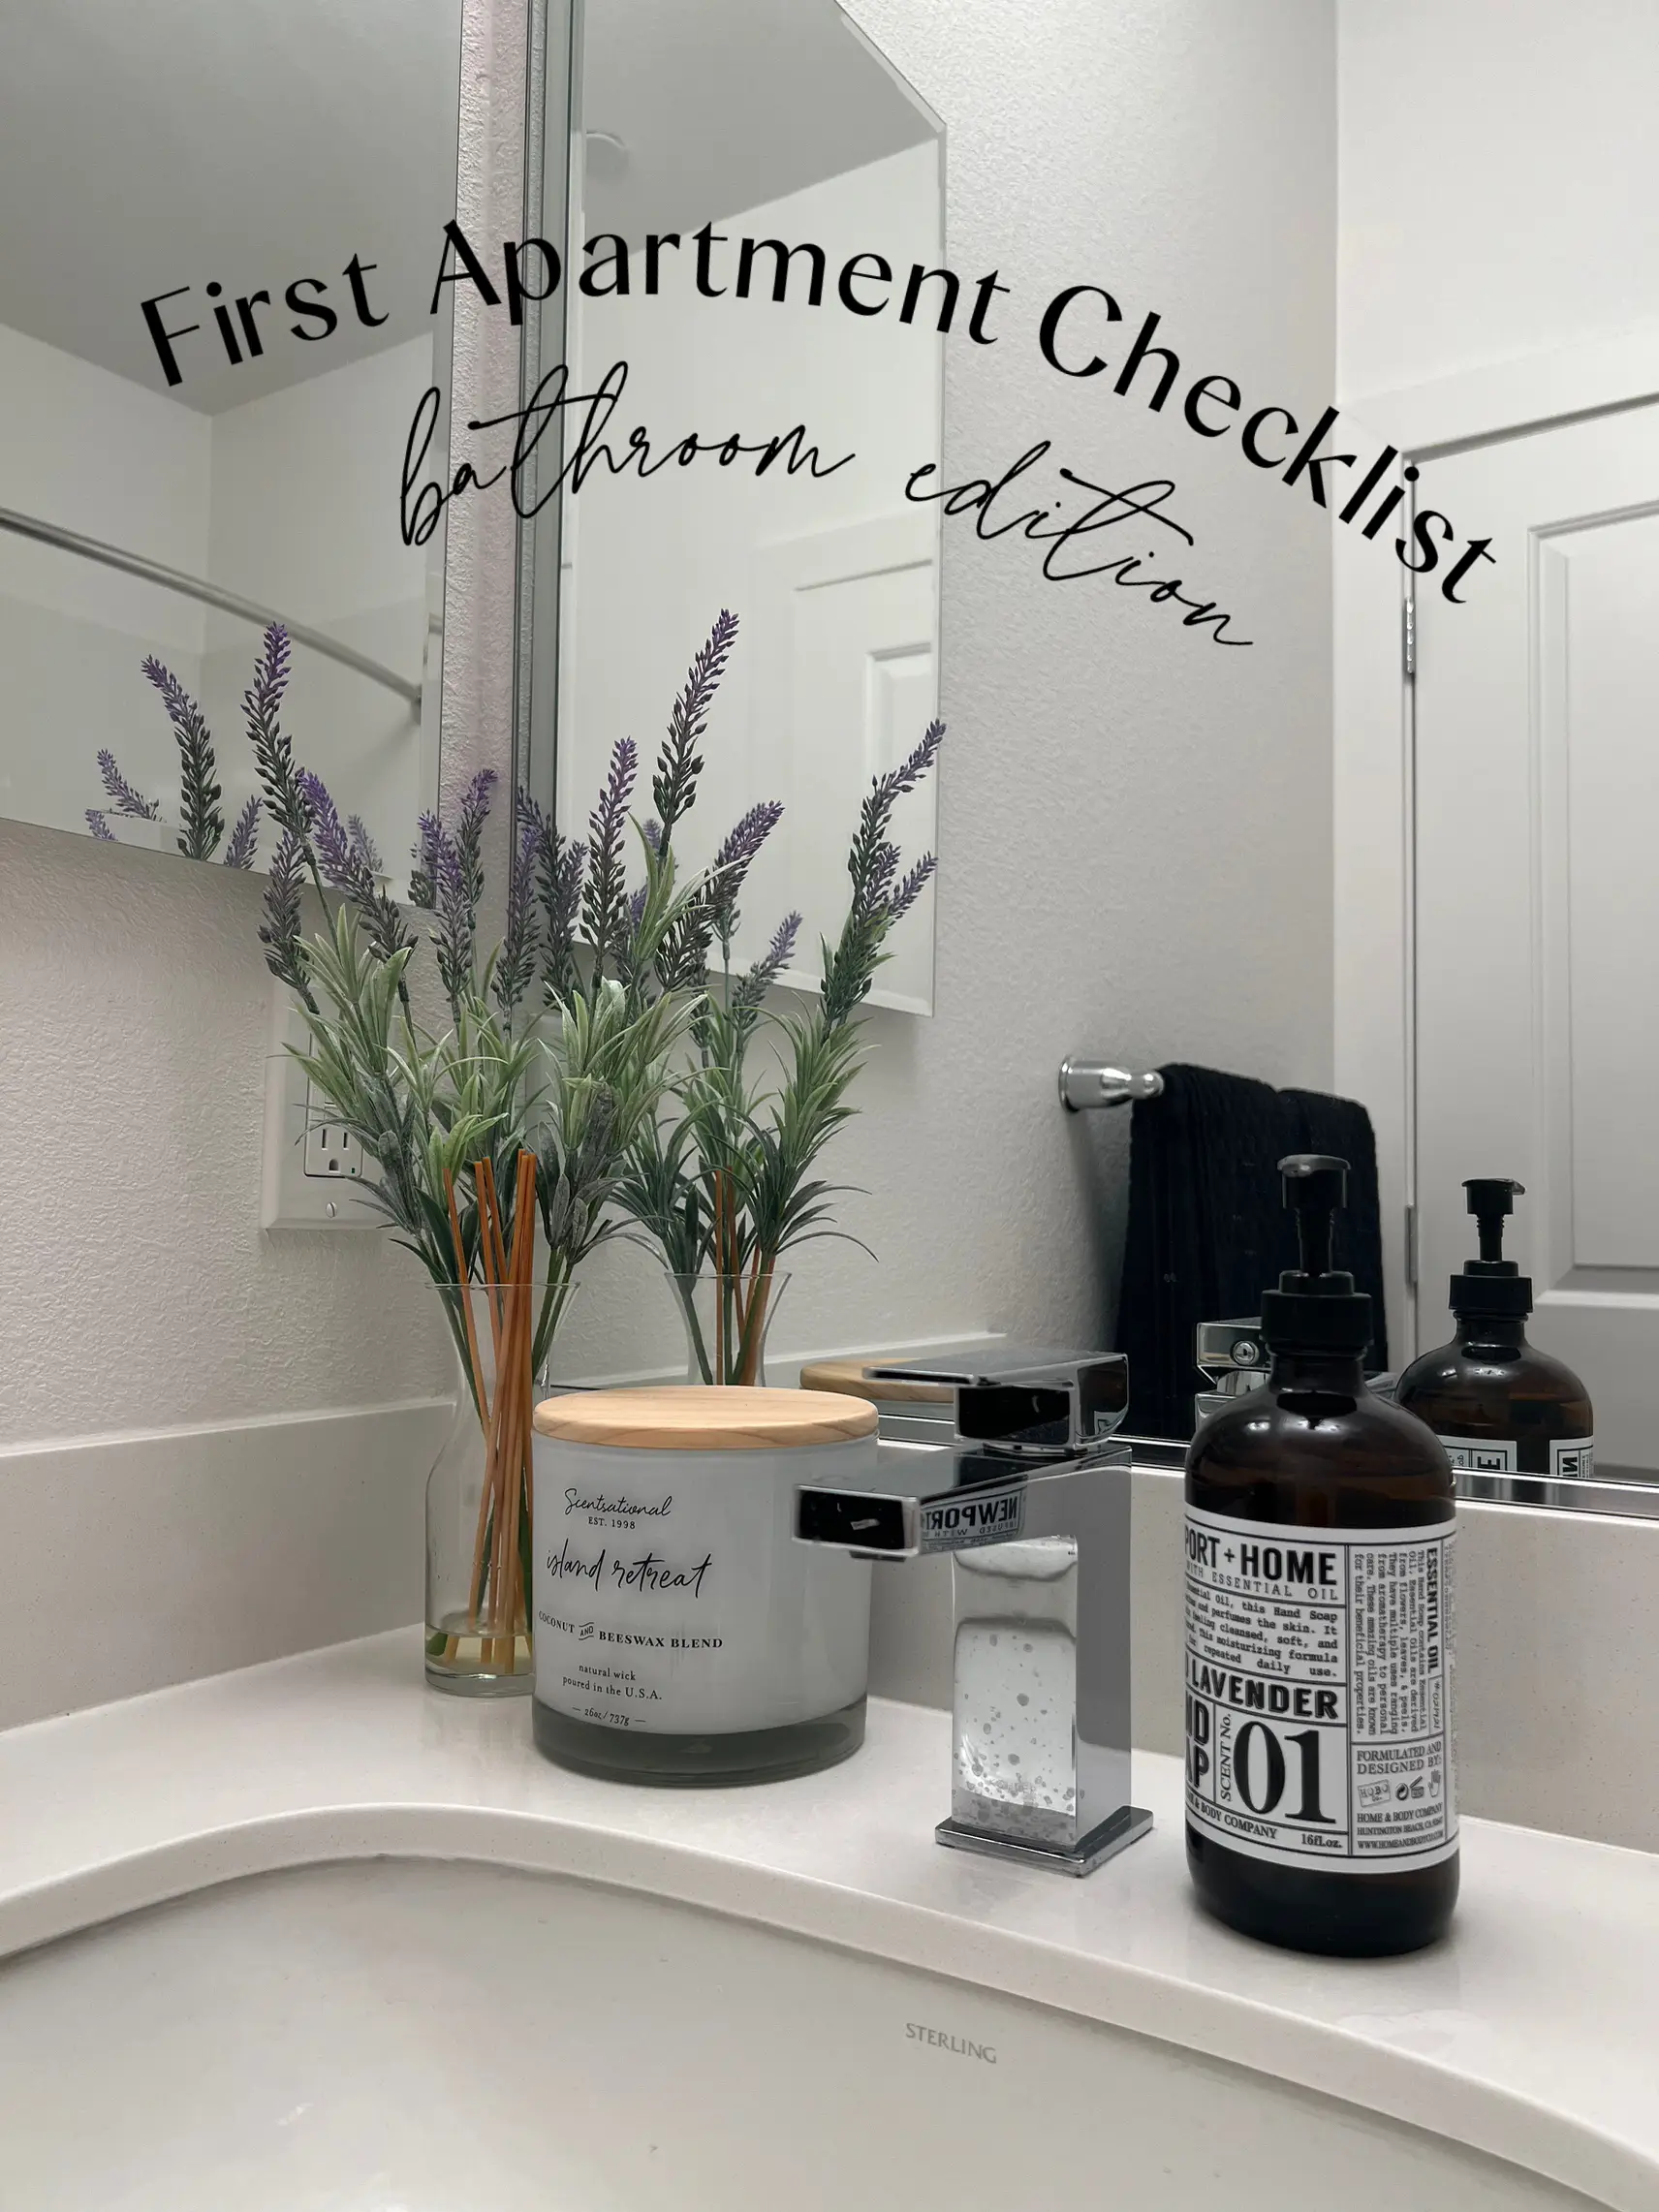 Bathroom Checklist: What you Need for your New Home